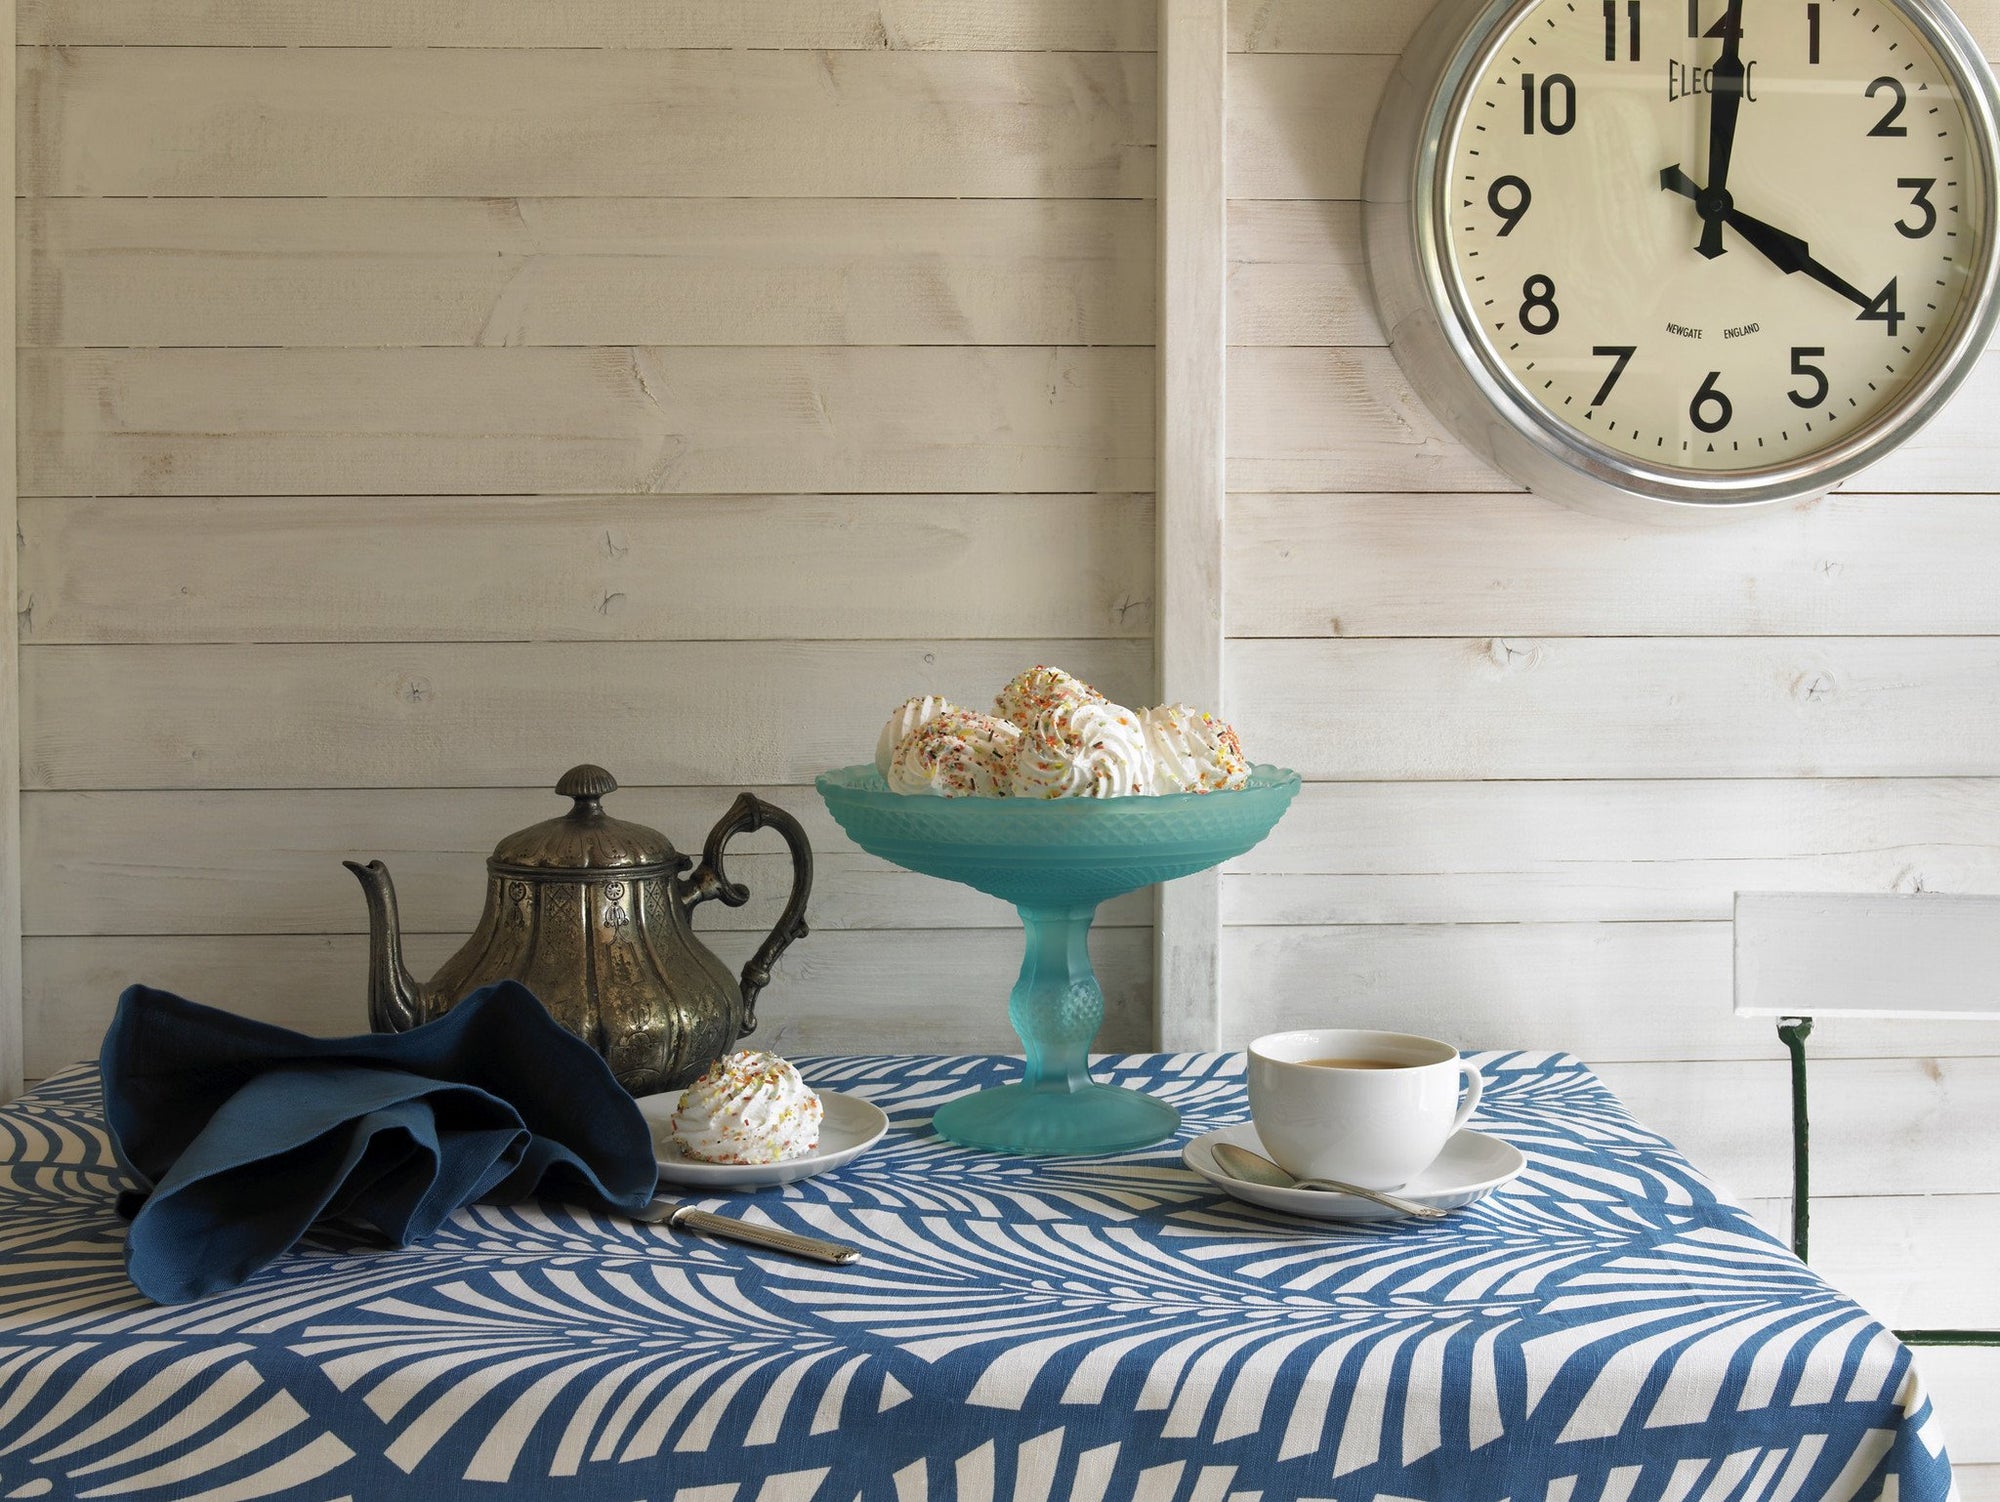 Cotton linen tablecloths, napkins and table runners in great shades of blue. Ships from Canada worldwide including the USA